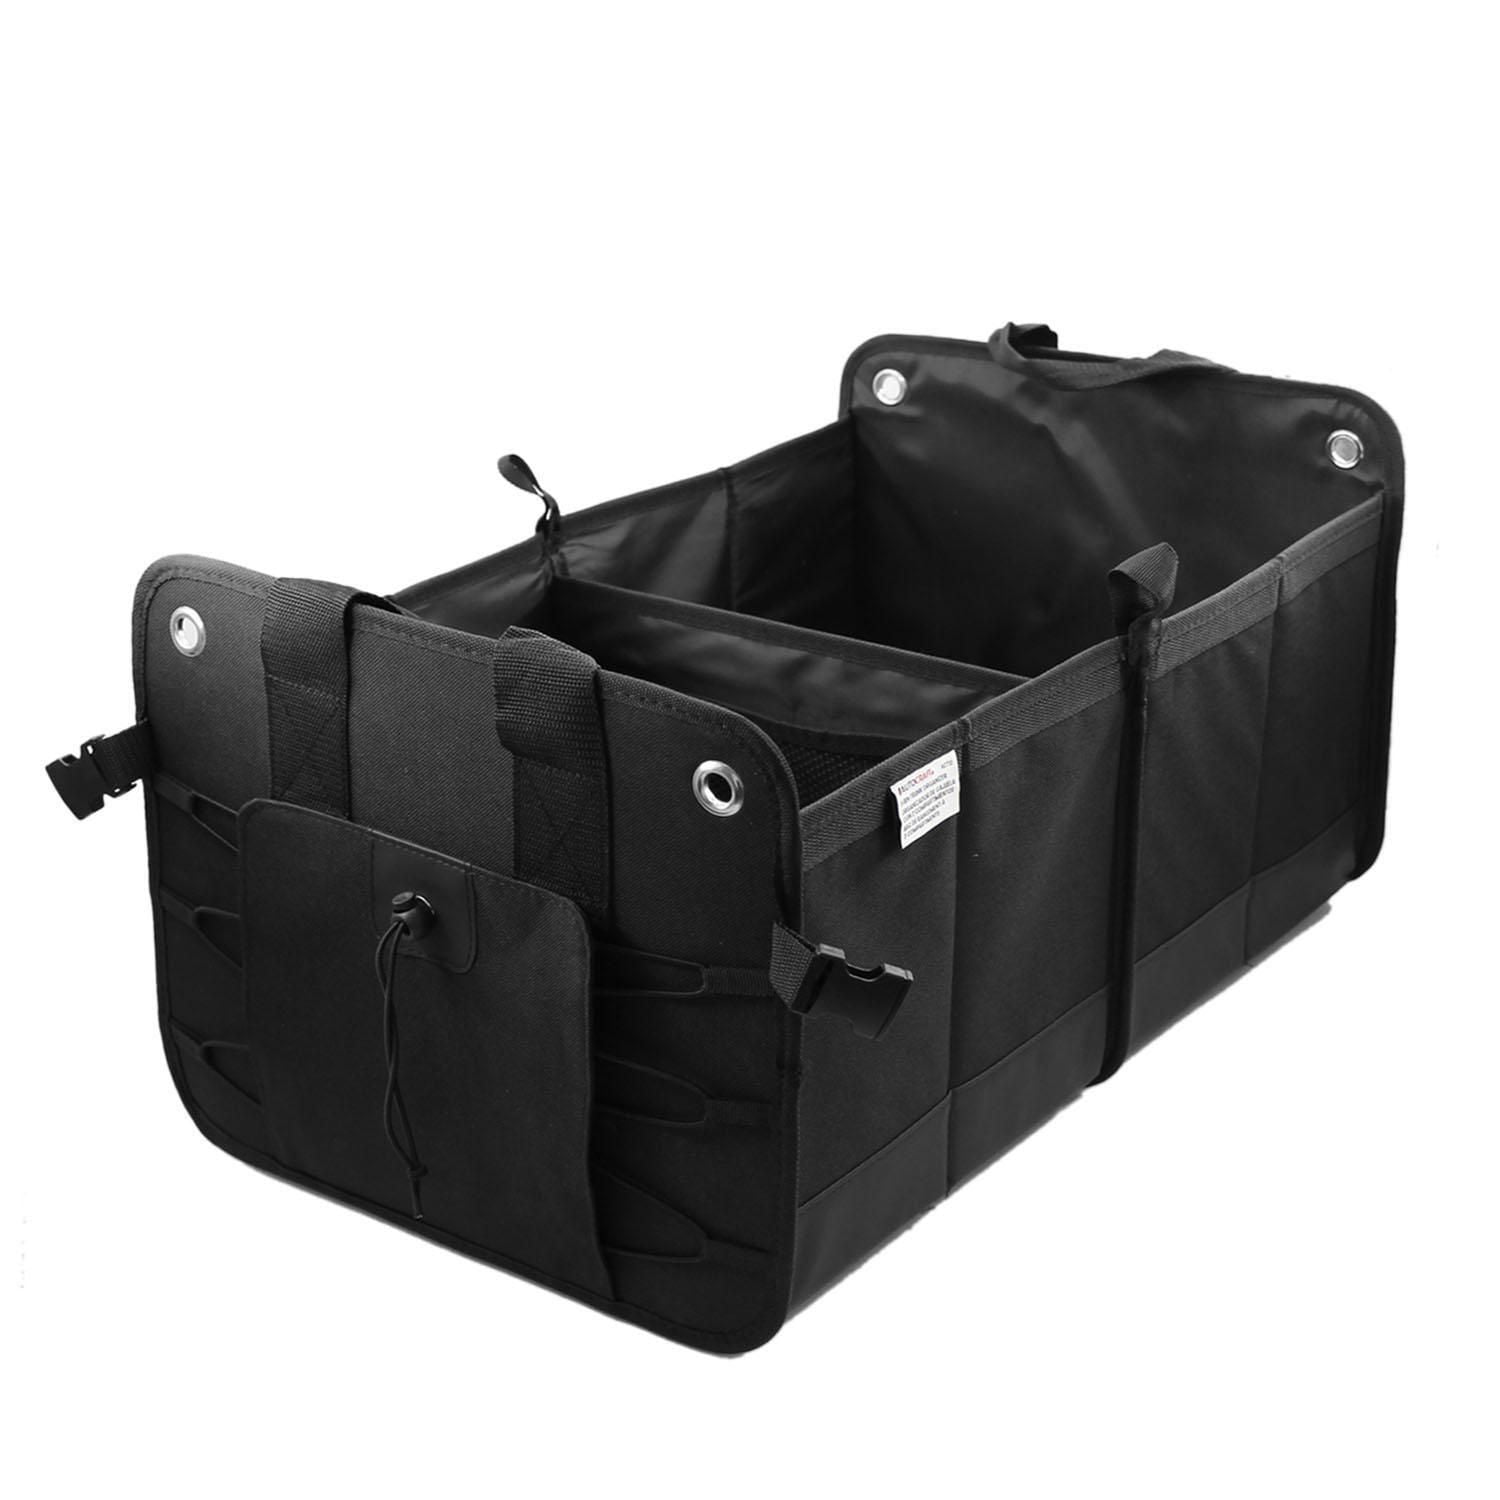 Autocraft Trunk Organizer - Expandable 2-bin unit: 14.5 x 12.25 x 23 -  Folds for easy storage when not in use, 1 each, sold by each 